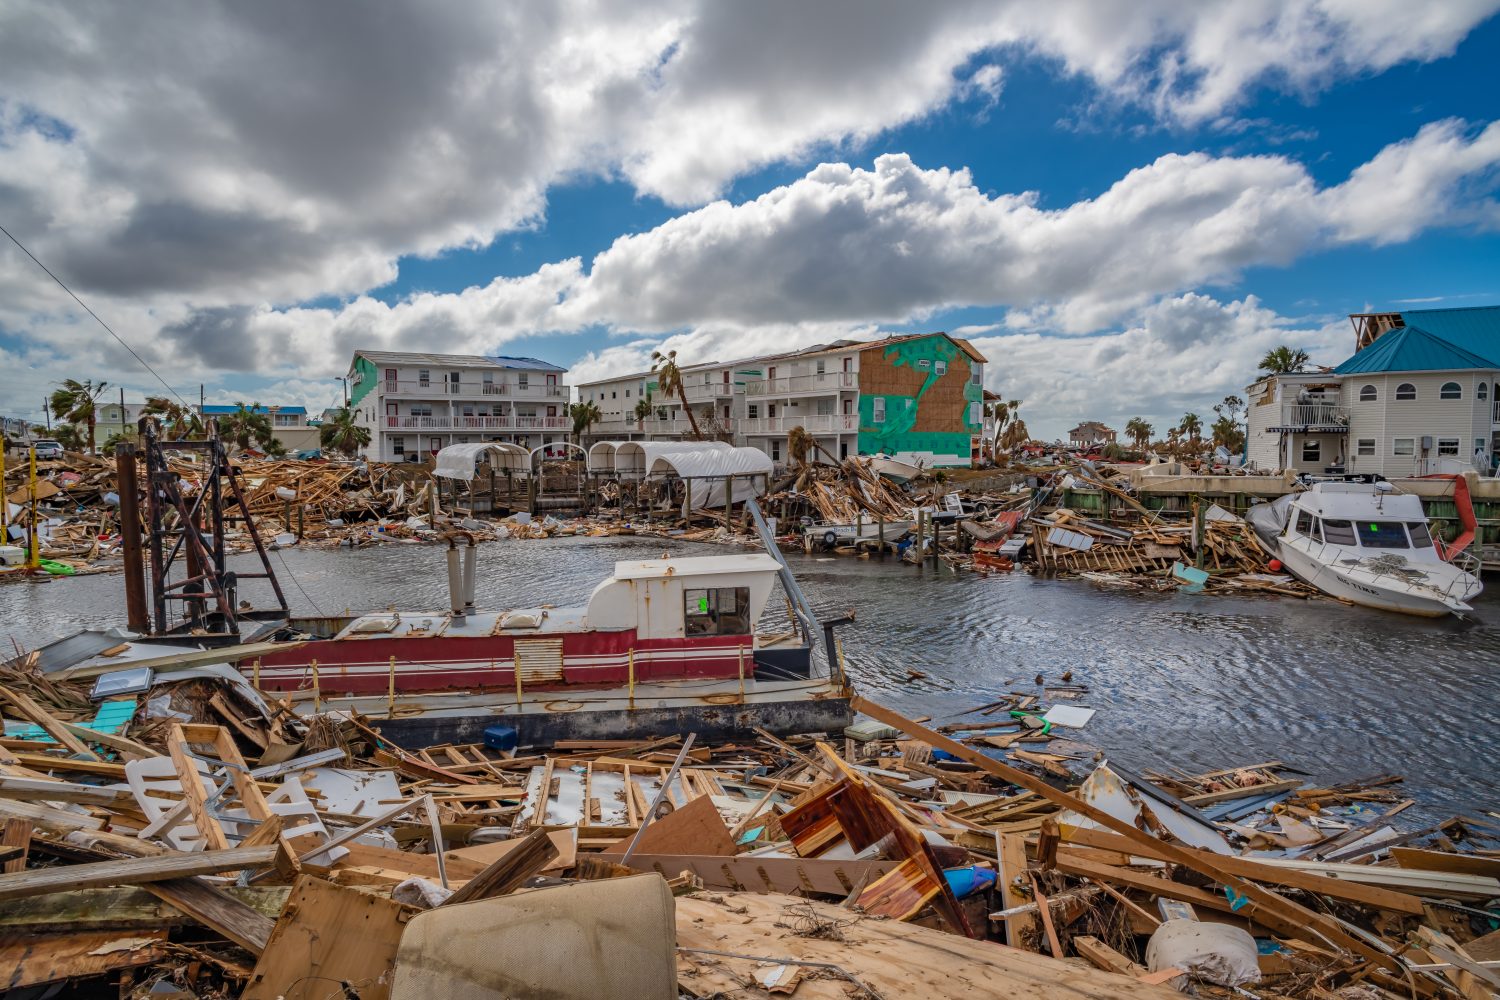 Damaged homes, condos, and docks in a coastal canal community in Mexico Beach following Hurricane Michael